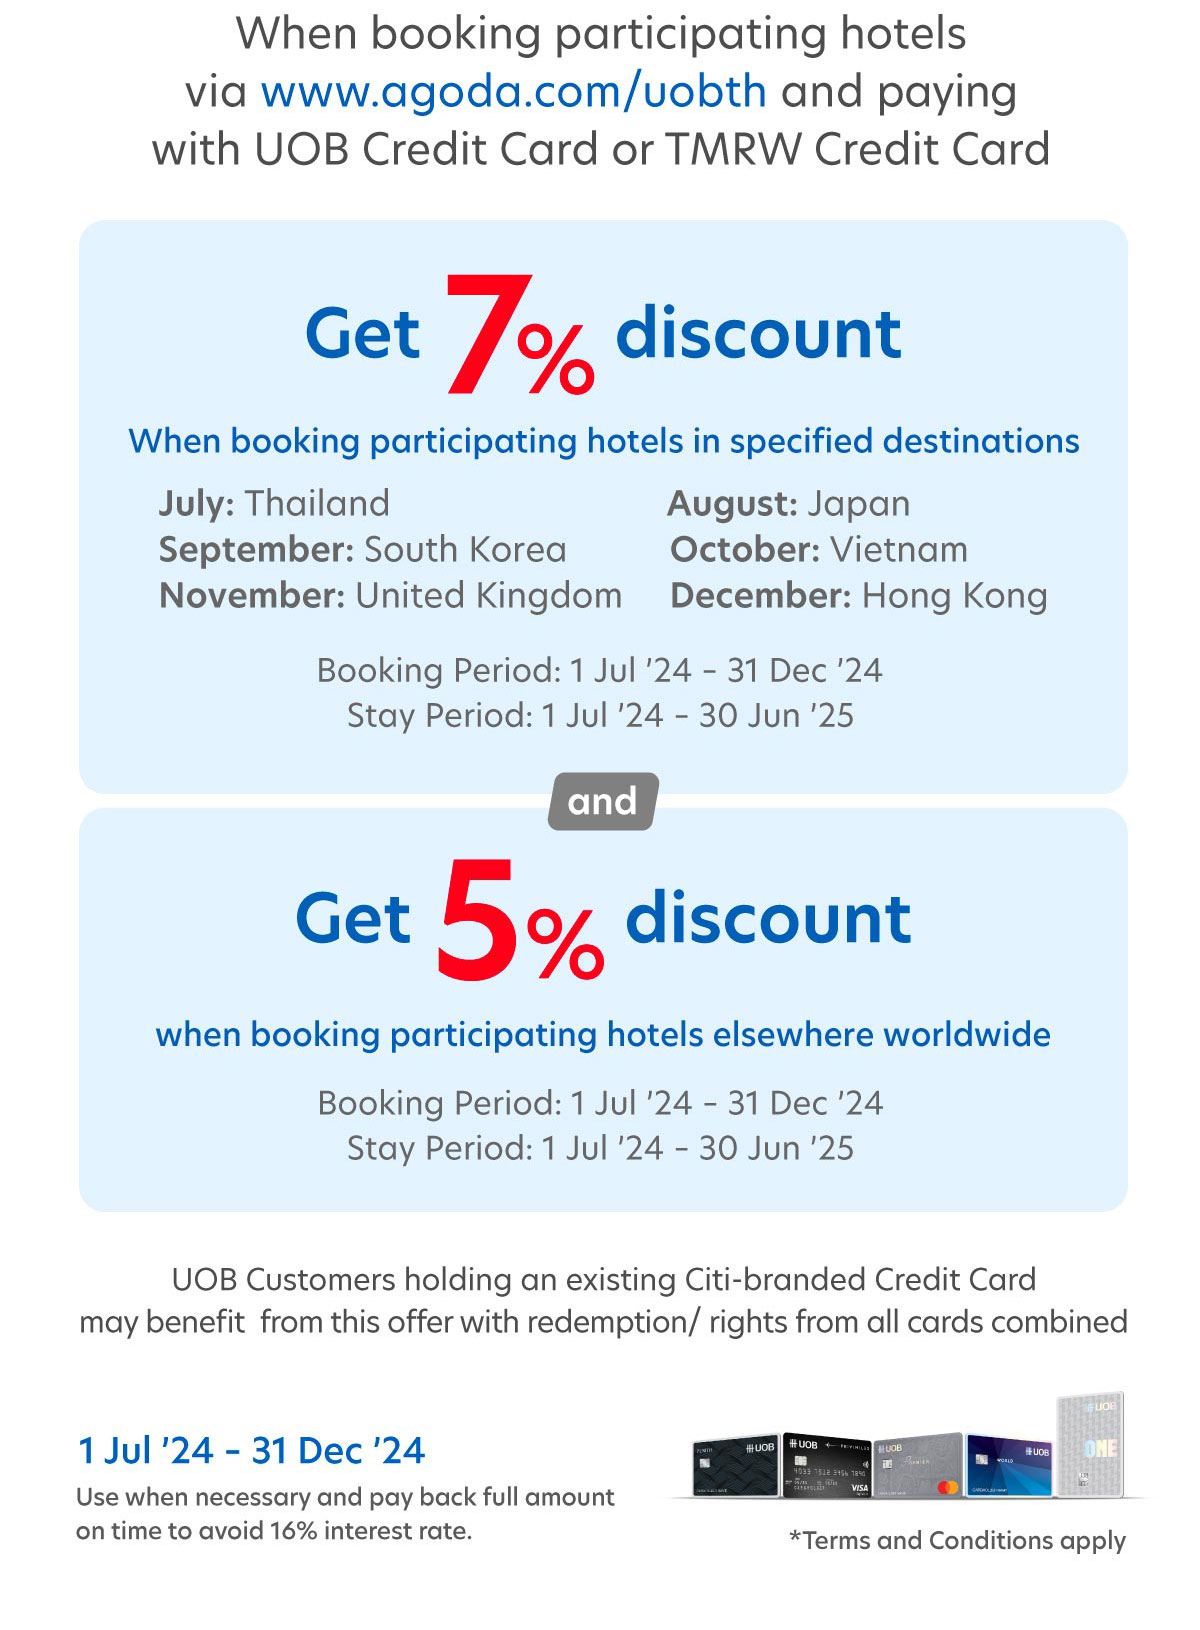 Get up to 7% hotels discount when booking via Agoda and paying with UOB Credit Card or TMRW Credit Card